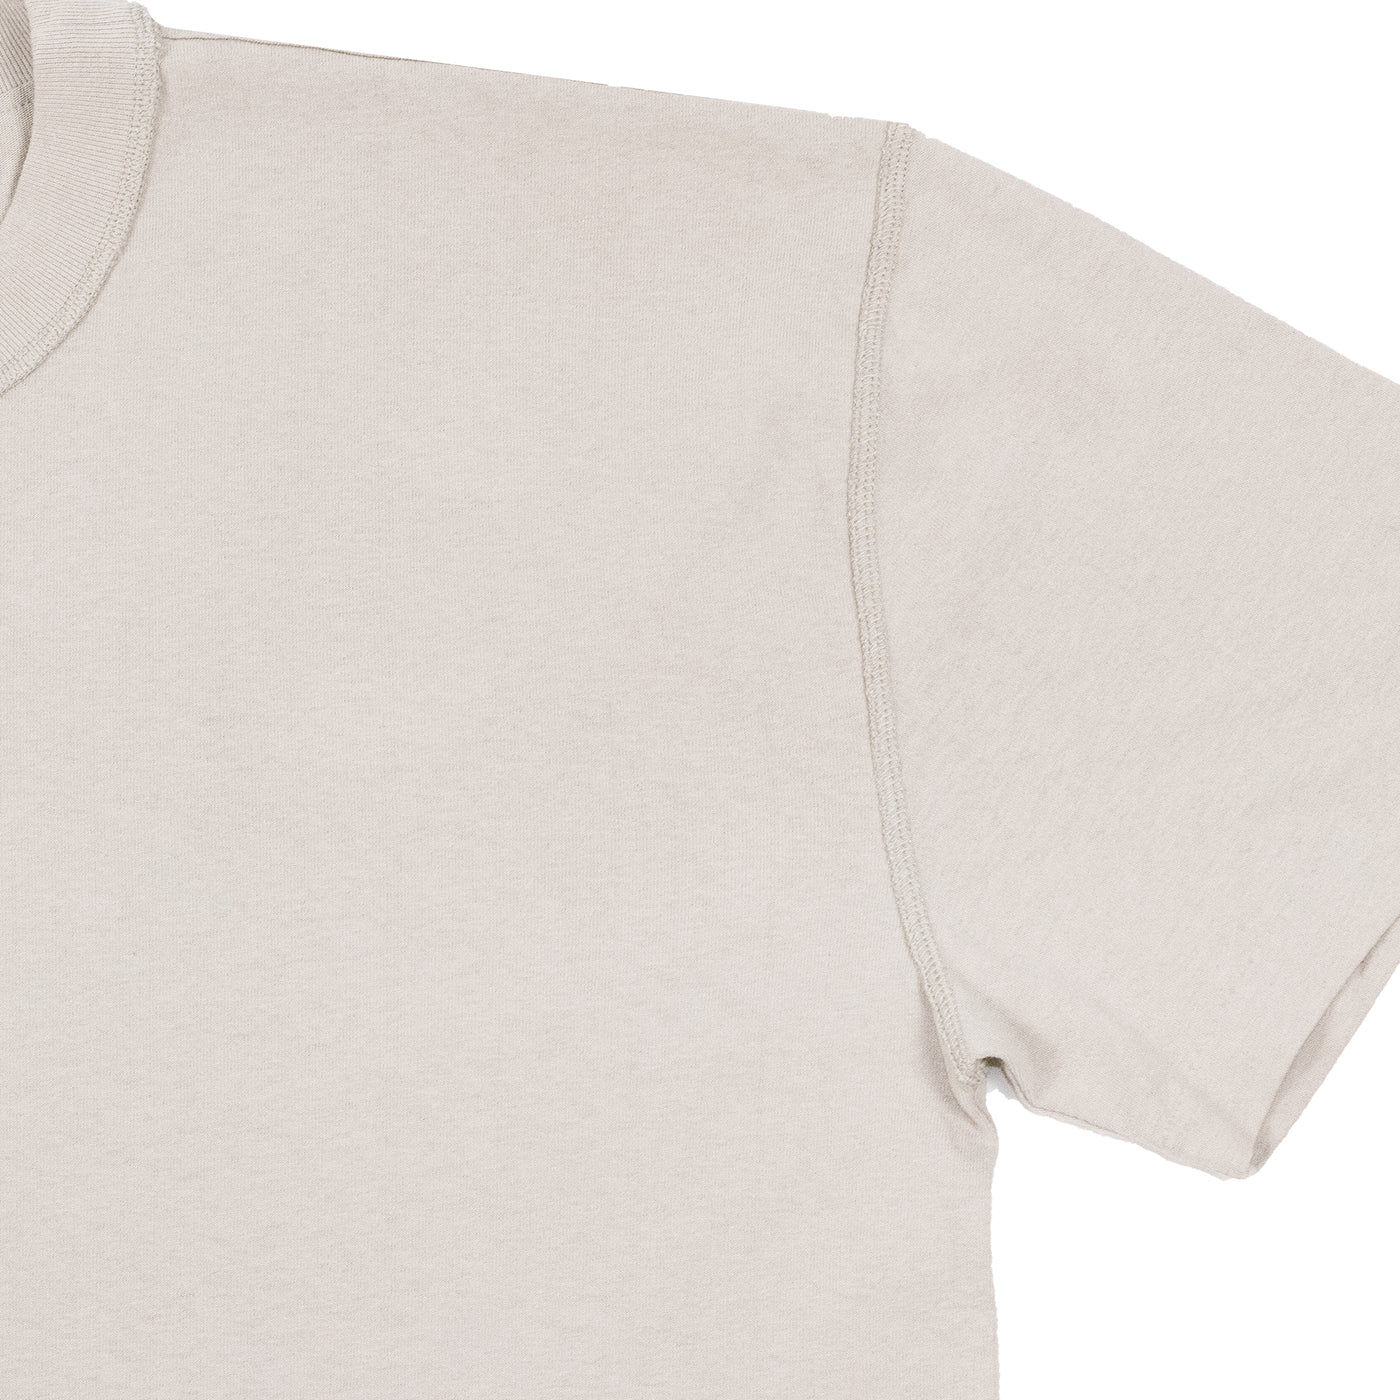 Limited Edition (Ultra) T-Shirt - Cream - Detail 1